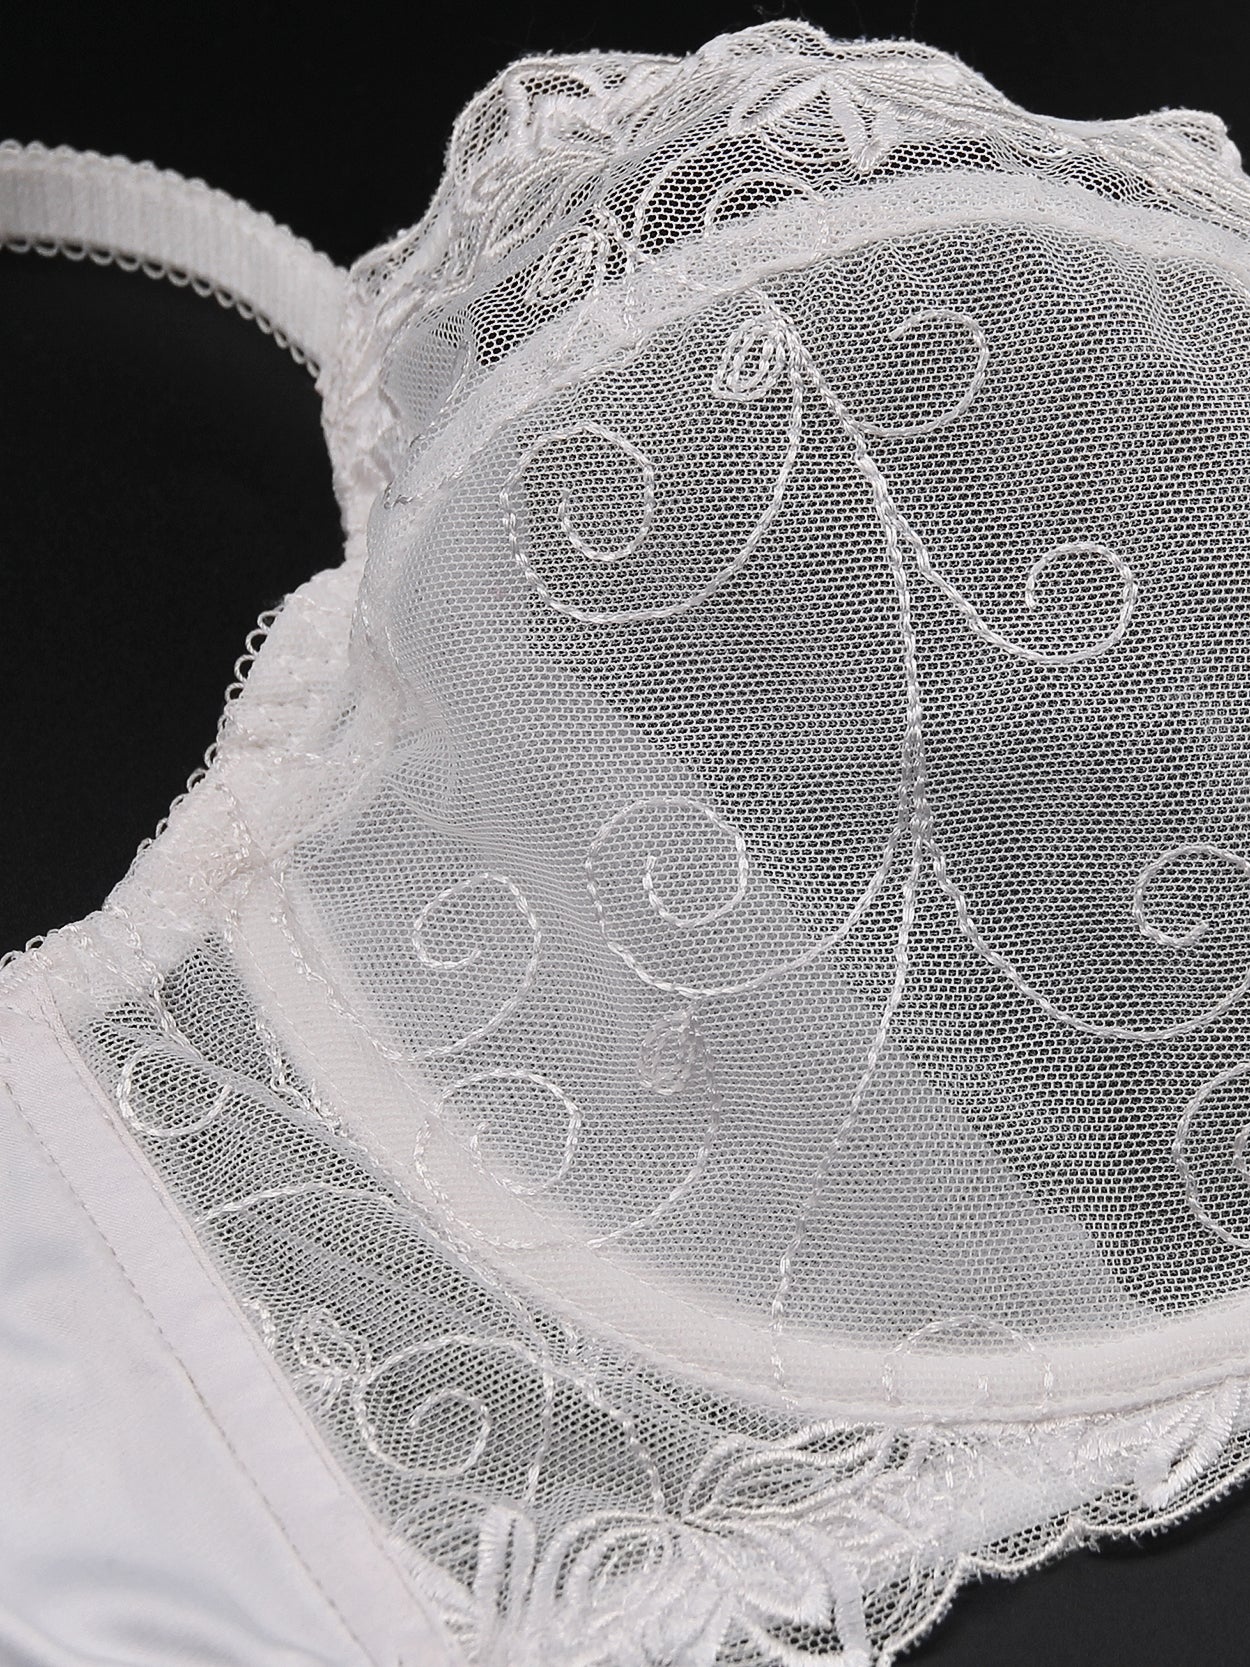 Plus Size See Through Unlined Underwire Lace Bra White